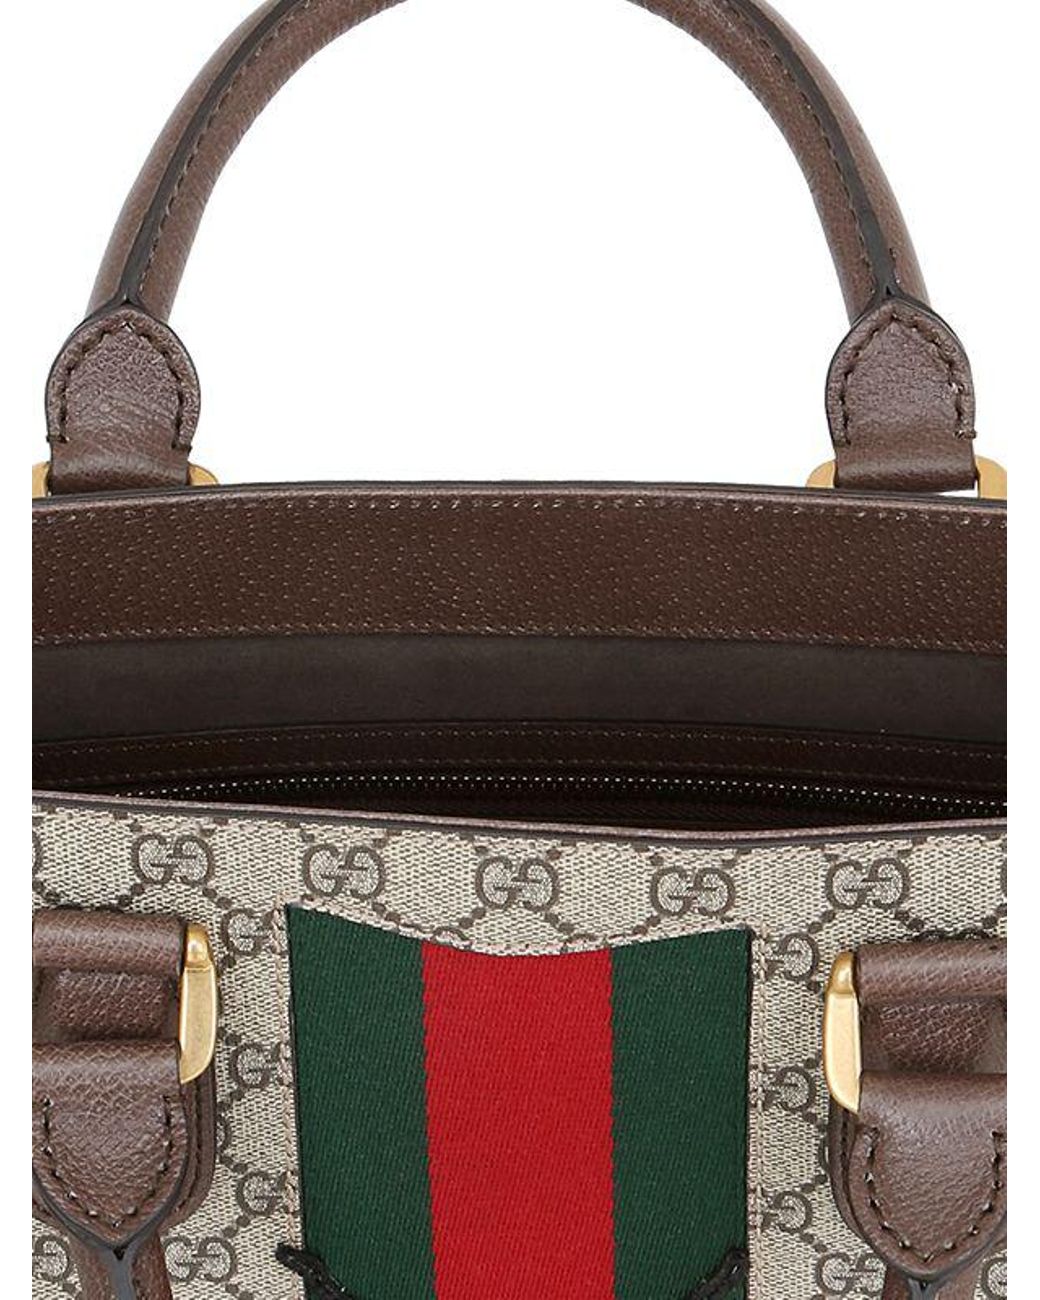 Gucci Bee Patch Gg Supreme Tote Bag in Natural | Lyst